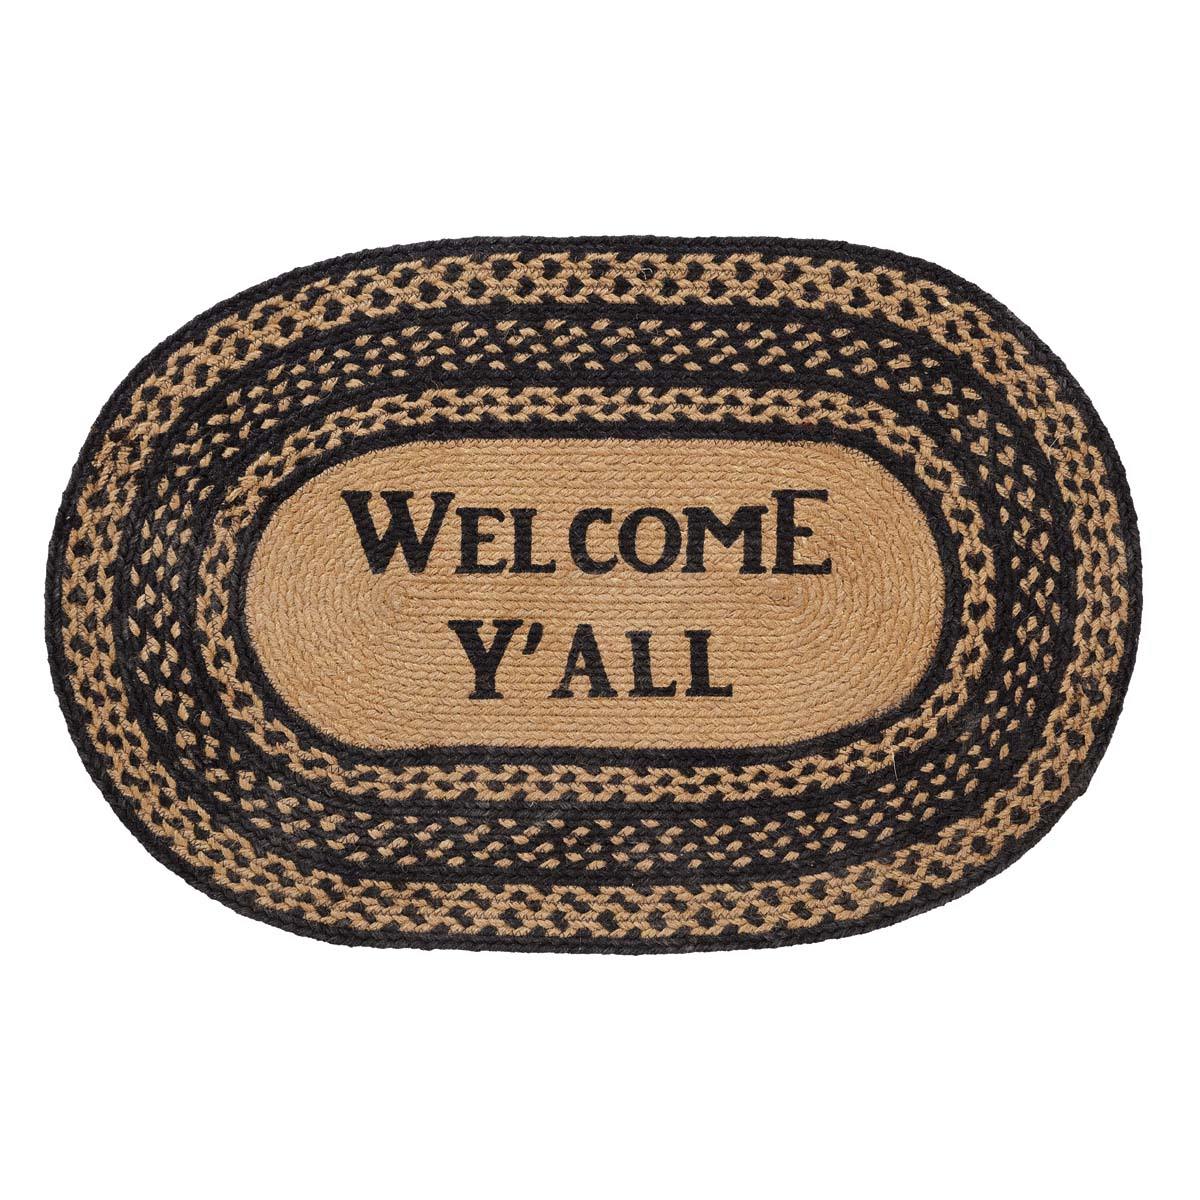 Farmhouse Jute Braided Rug Oval Stencil Welcome Y'all 20"x30" with Rug Pad VHC Brands - The Fox Decor